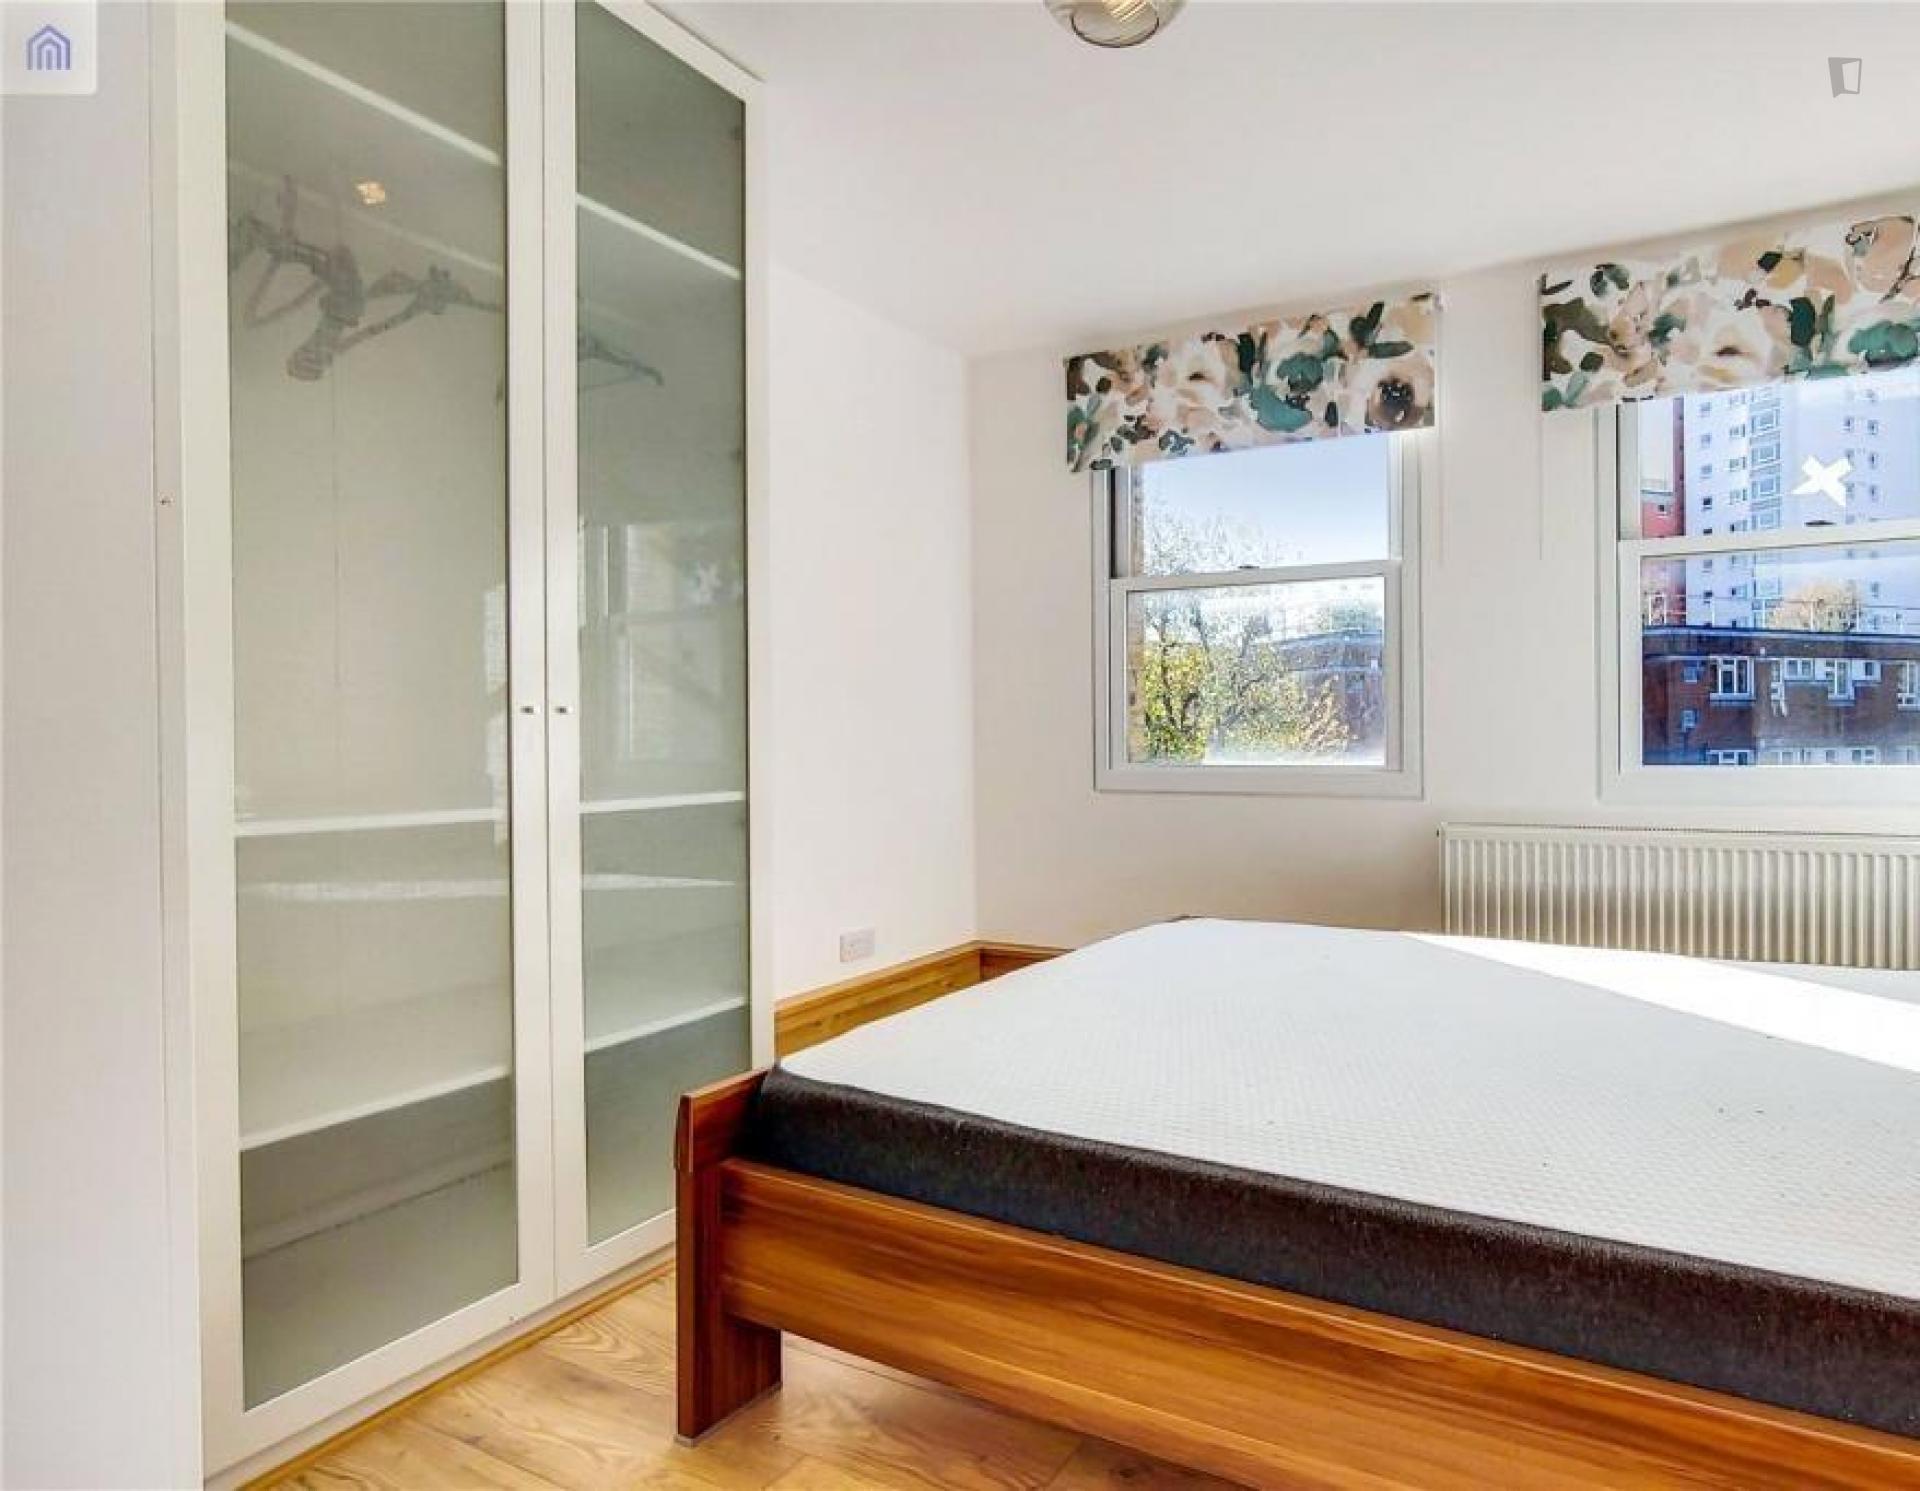 Grafton - Lovely furnished flat in London for expats